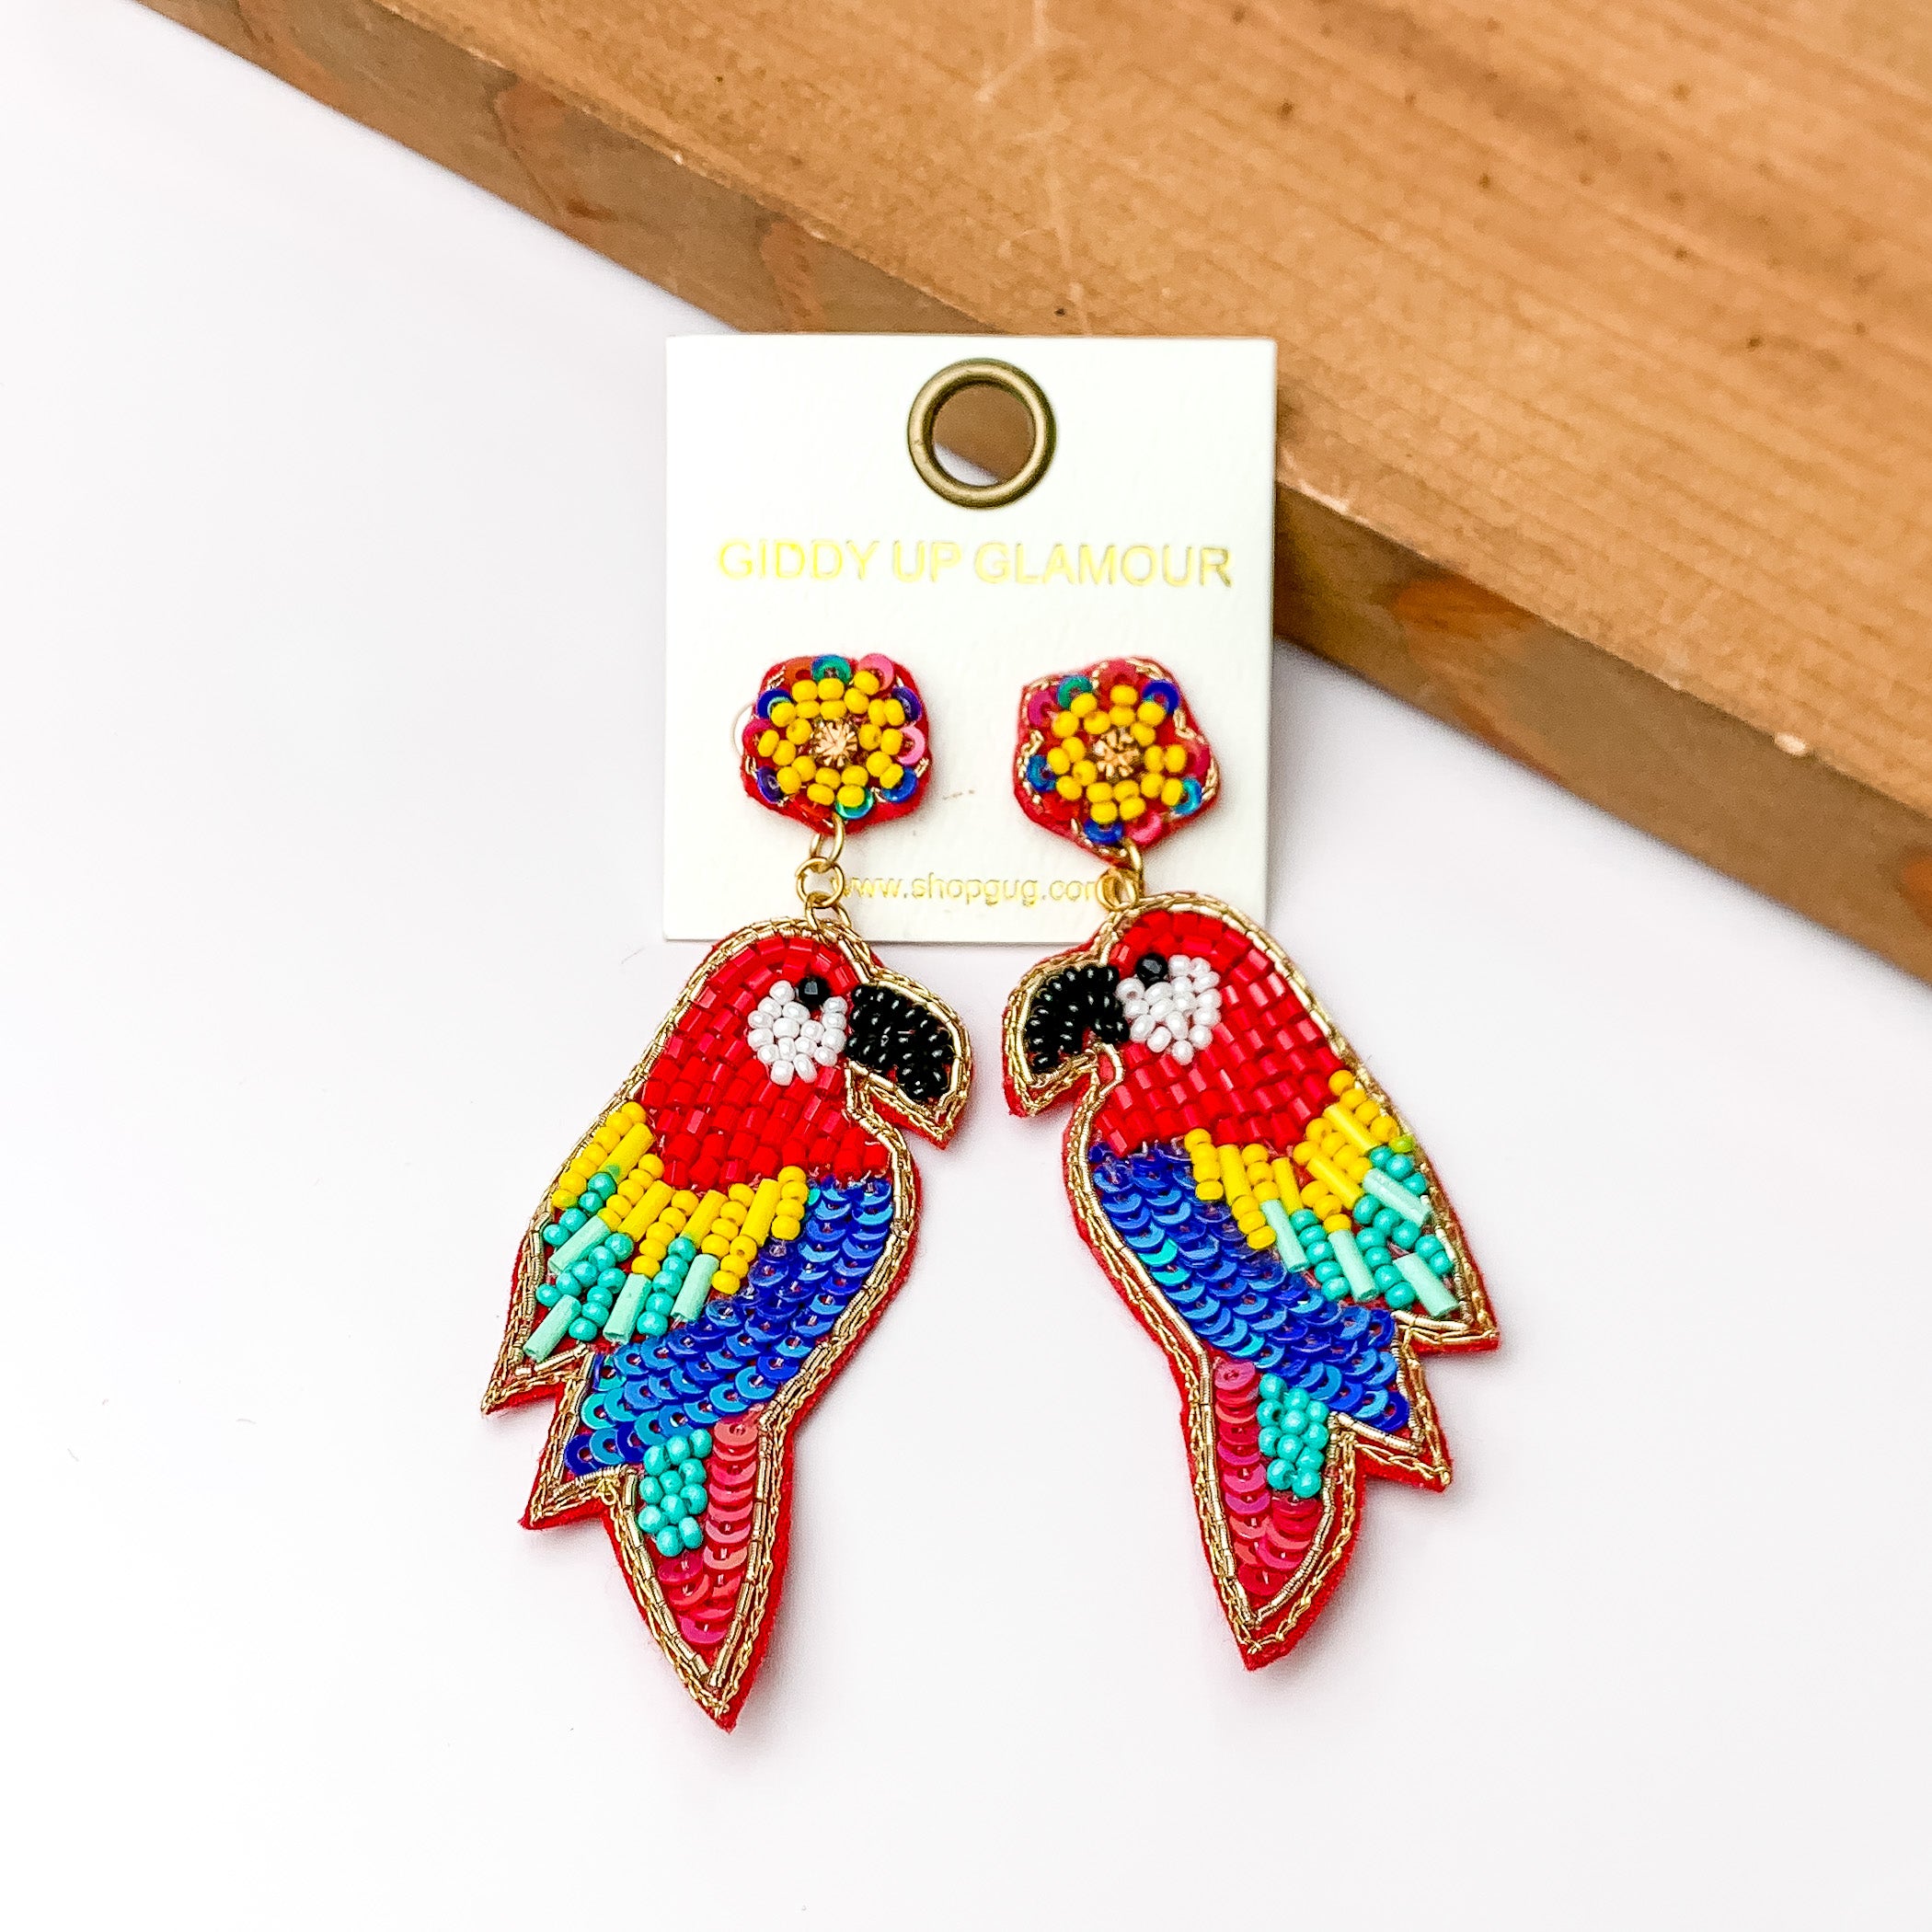 These parrot earrings are red with beads that are yellow, turquoise, and black. They do have seqence that are red and royal blue. These earrings are pictured in front of a piece of wood with a white background.